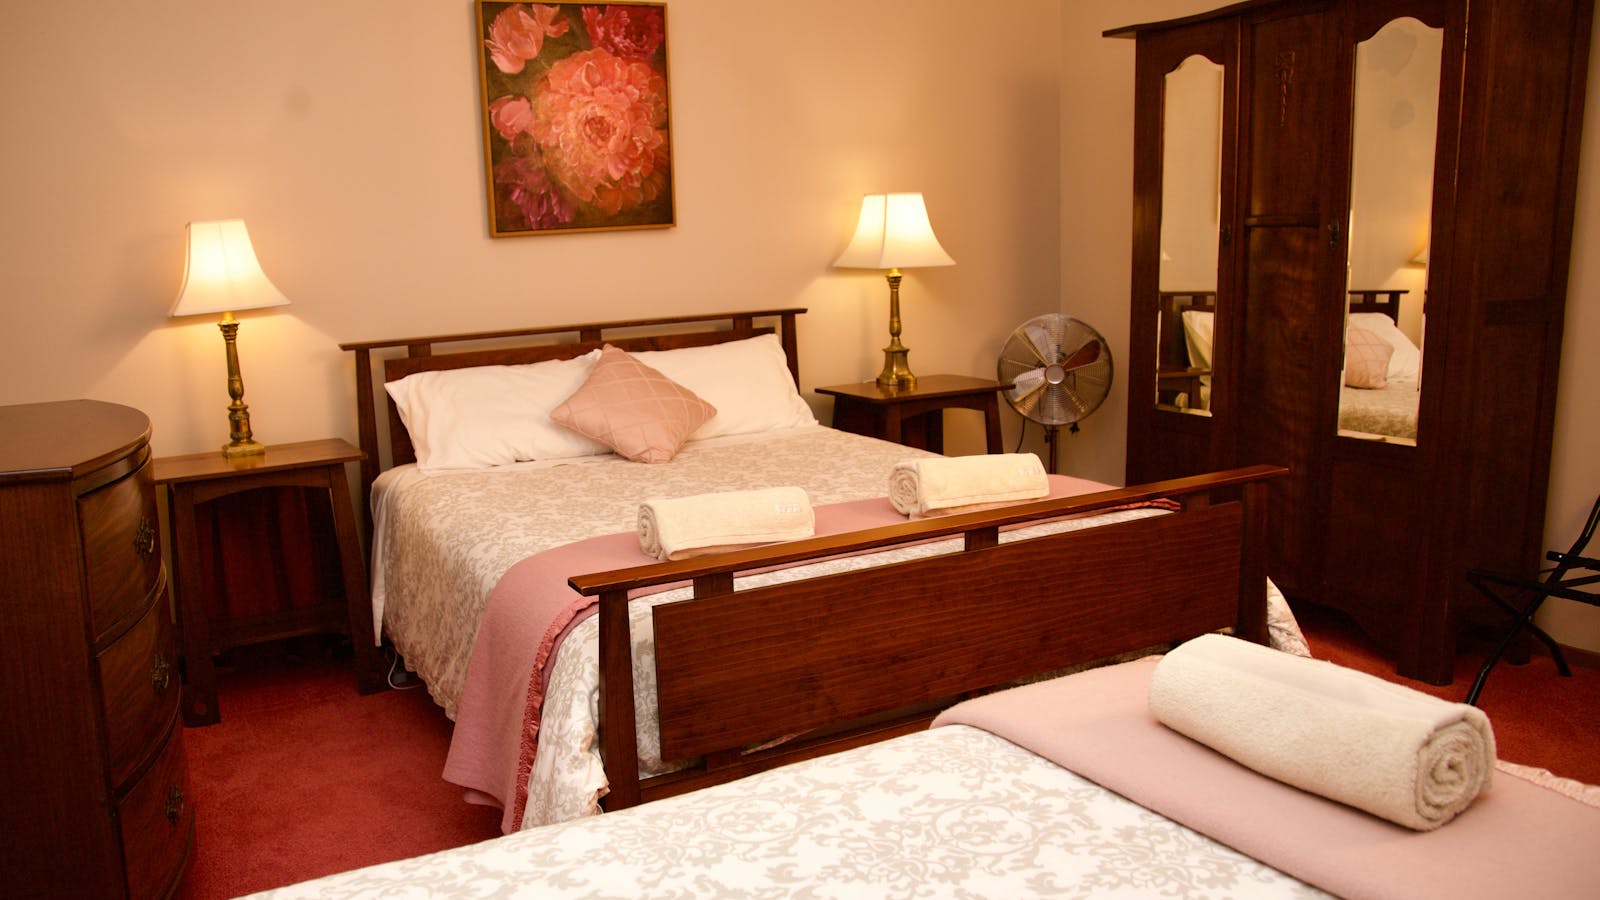 Suite 1 offers a single bedroom containing a queen and a single bed.